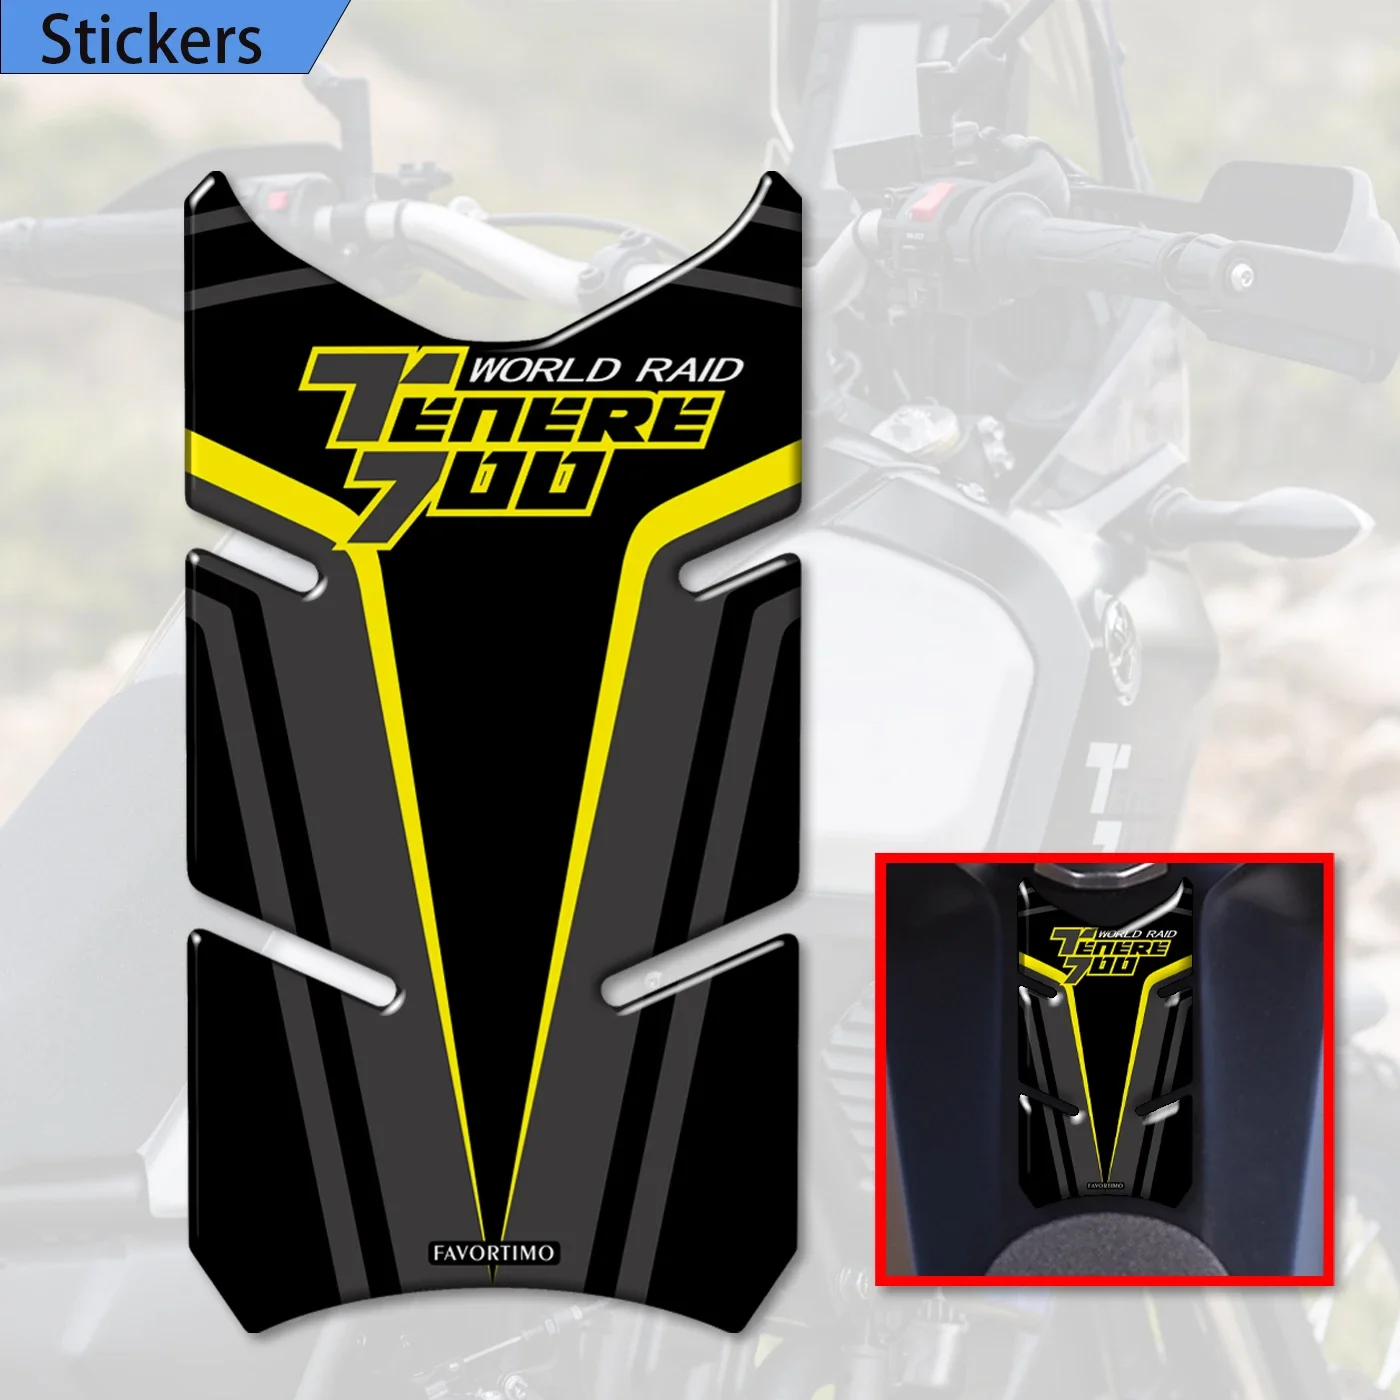 

Fit YAMAHA Tenere 700 T700 XTZ XT700 Stickers Tank Pad Protector Trunk Luggage Cases 2019 2020 2021